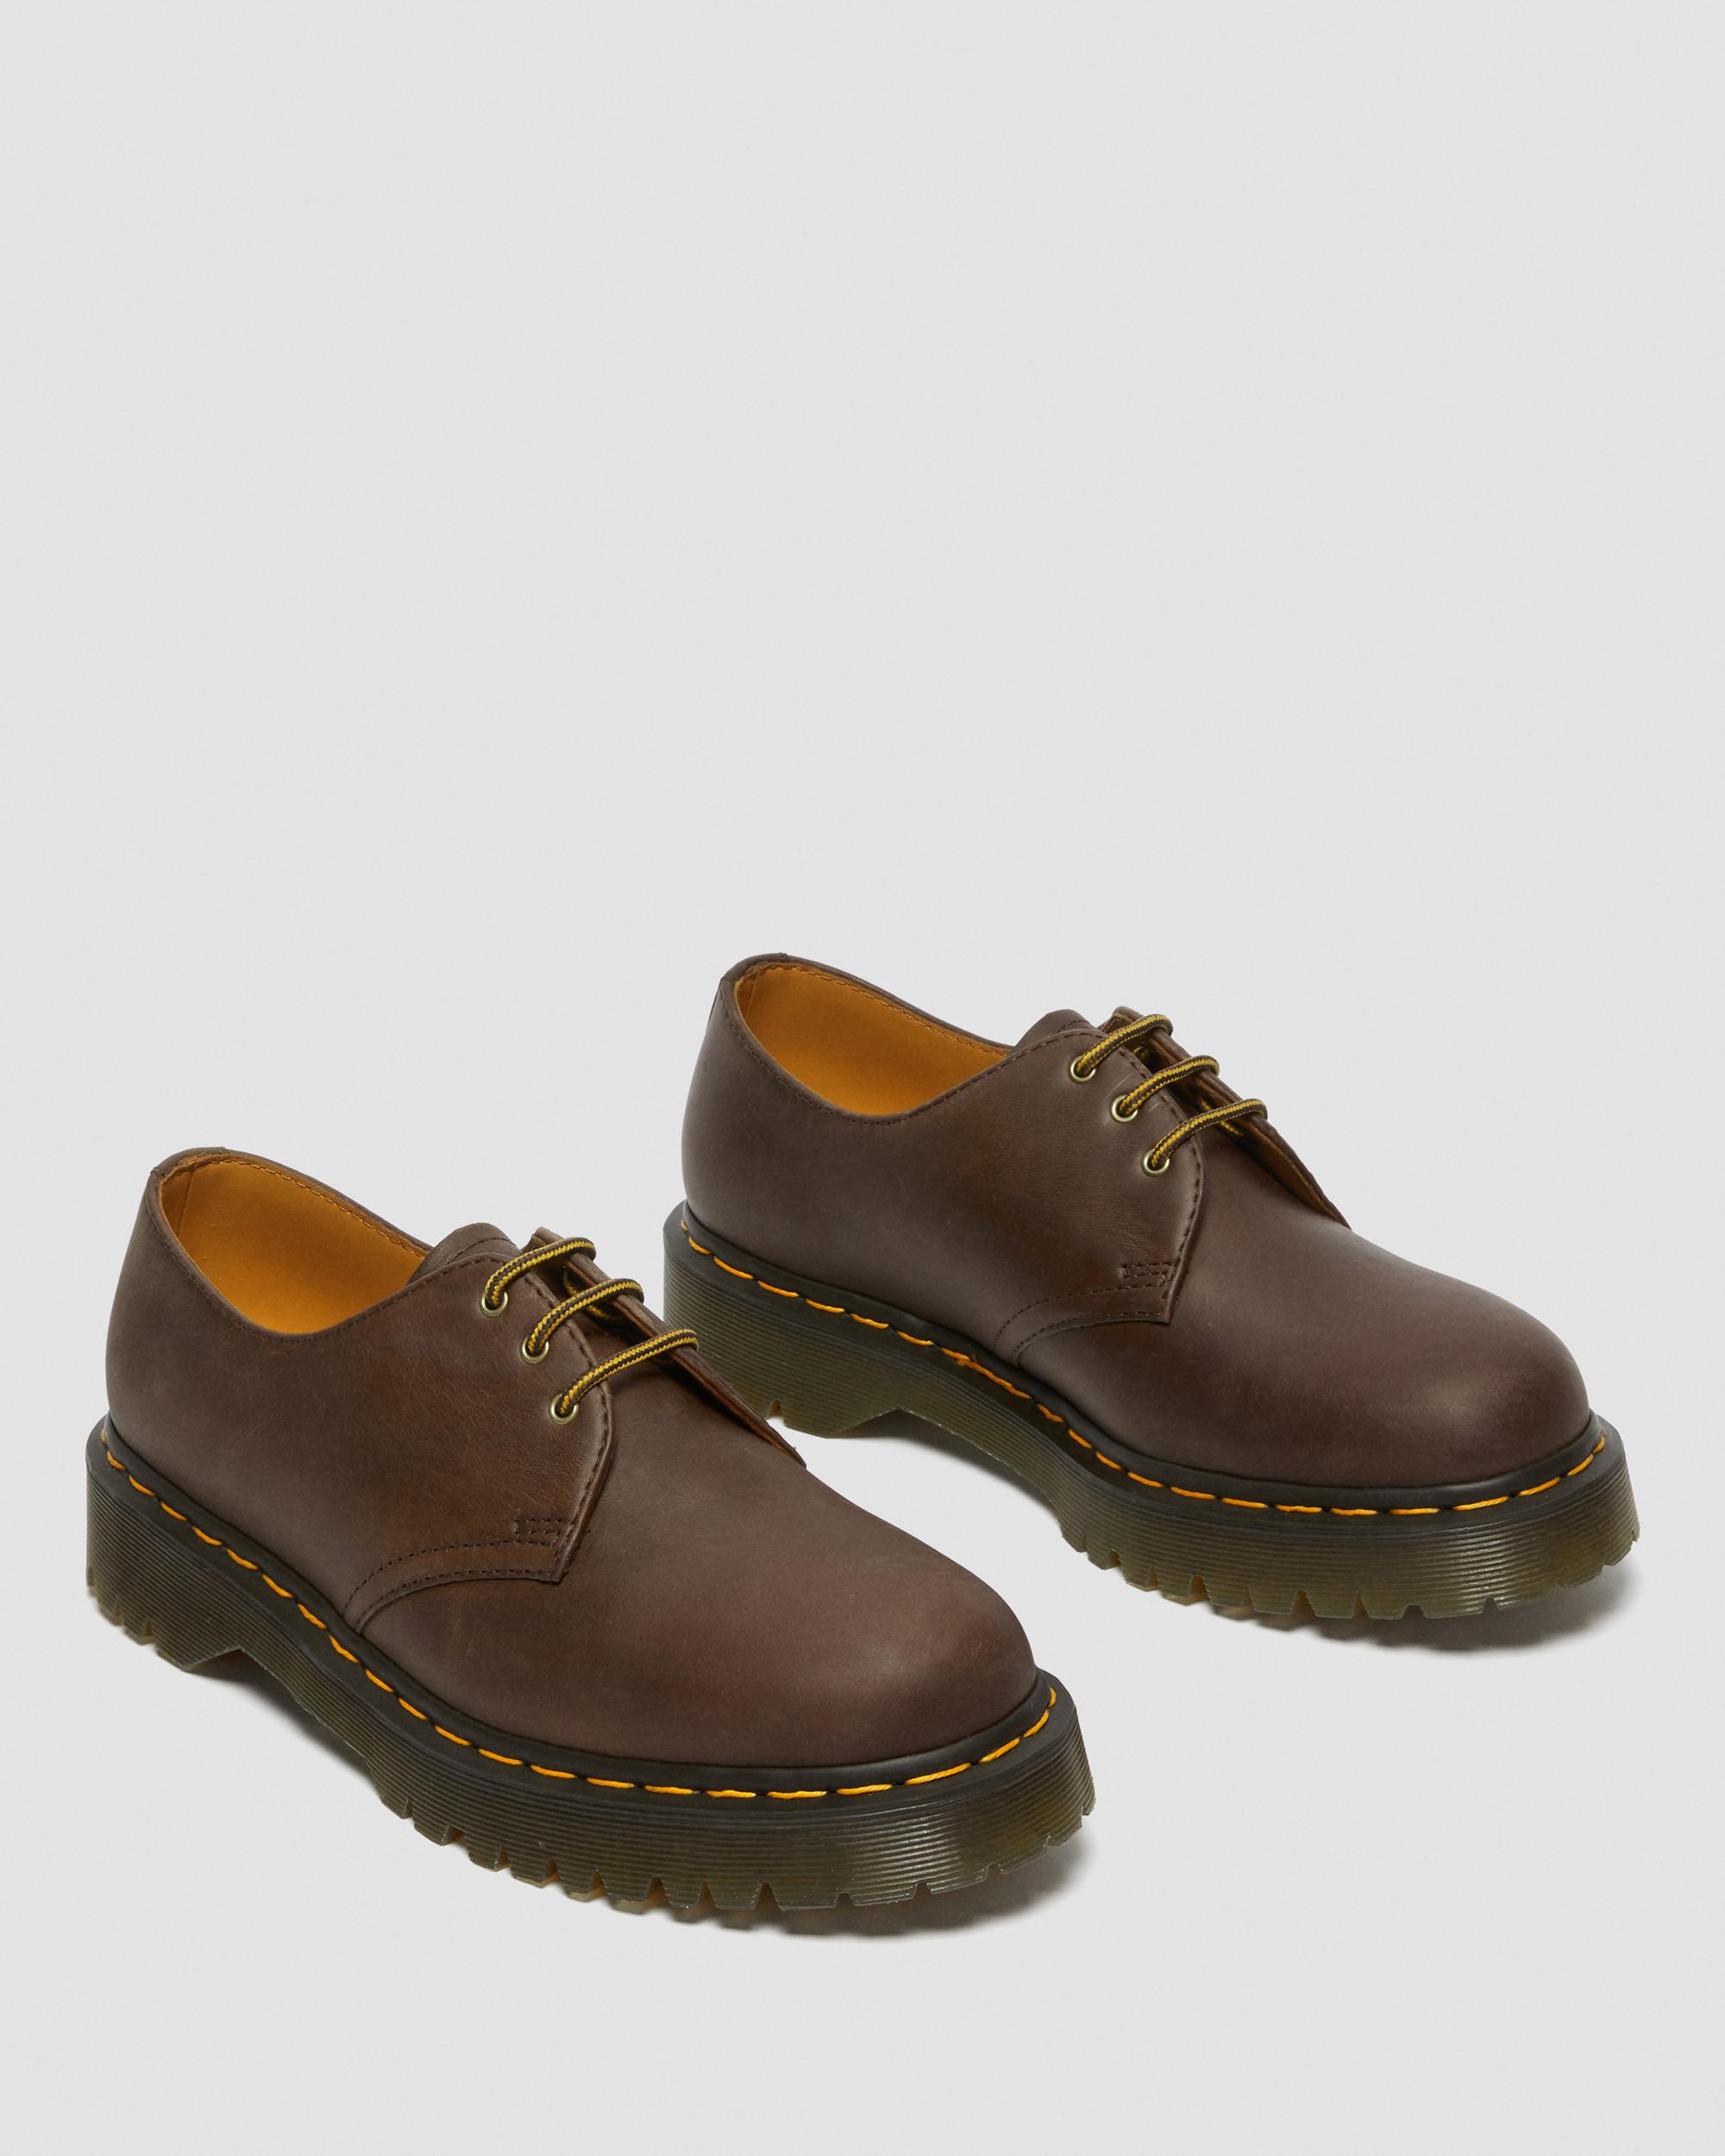 1461 Bex Crazy Horse Leather Oxford Shoes, Dark Brown | Dr. Martens